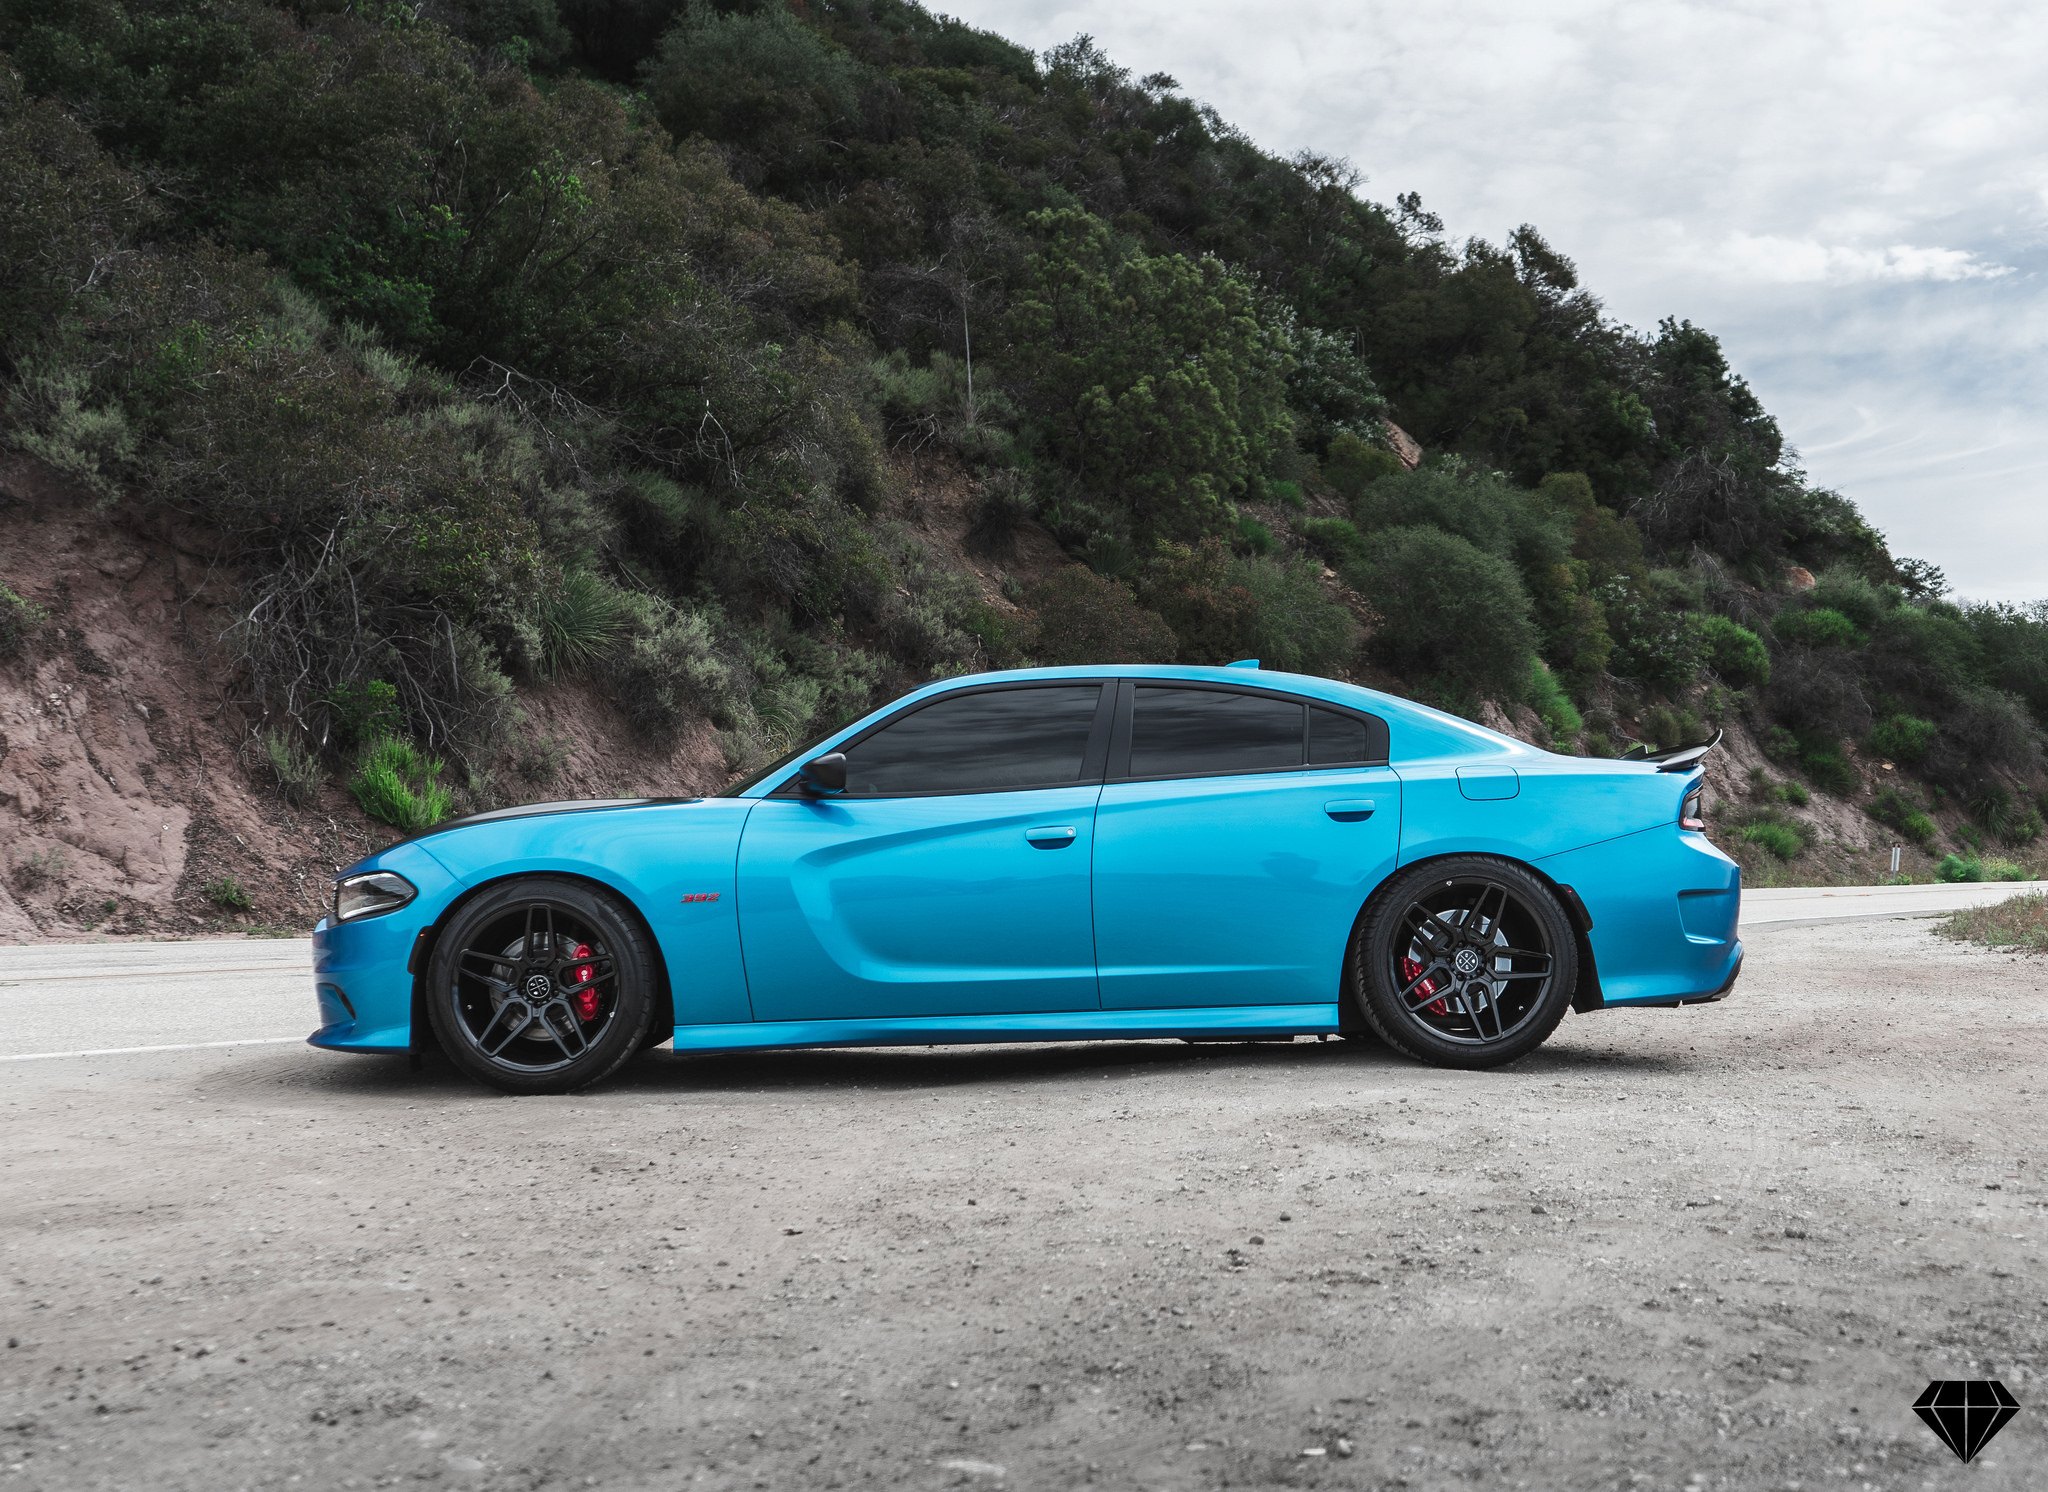 Blue Dodge Charger 392 with Blaque Diamond Wheels - Photo by Blaque Diamond Wheels